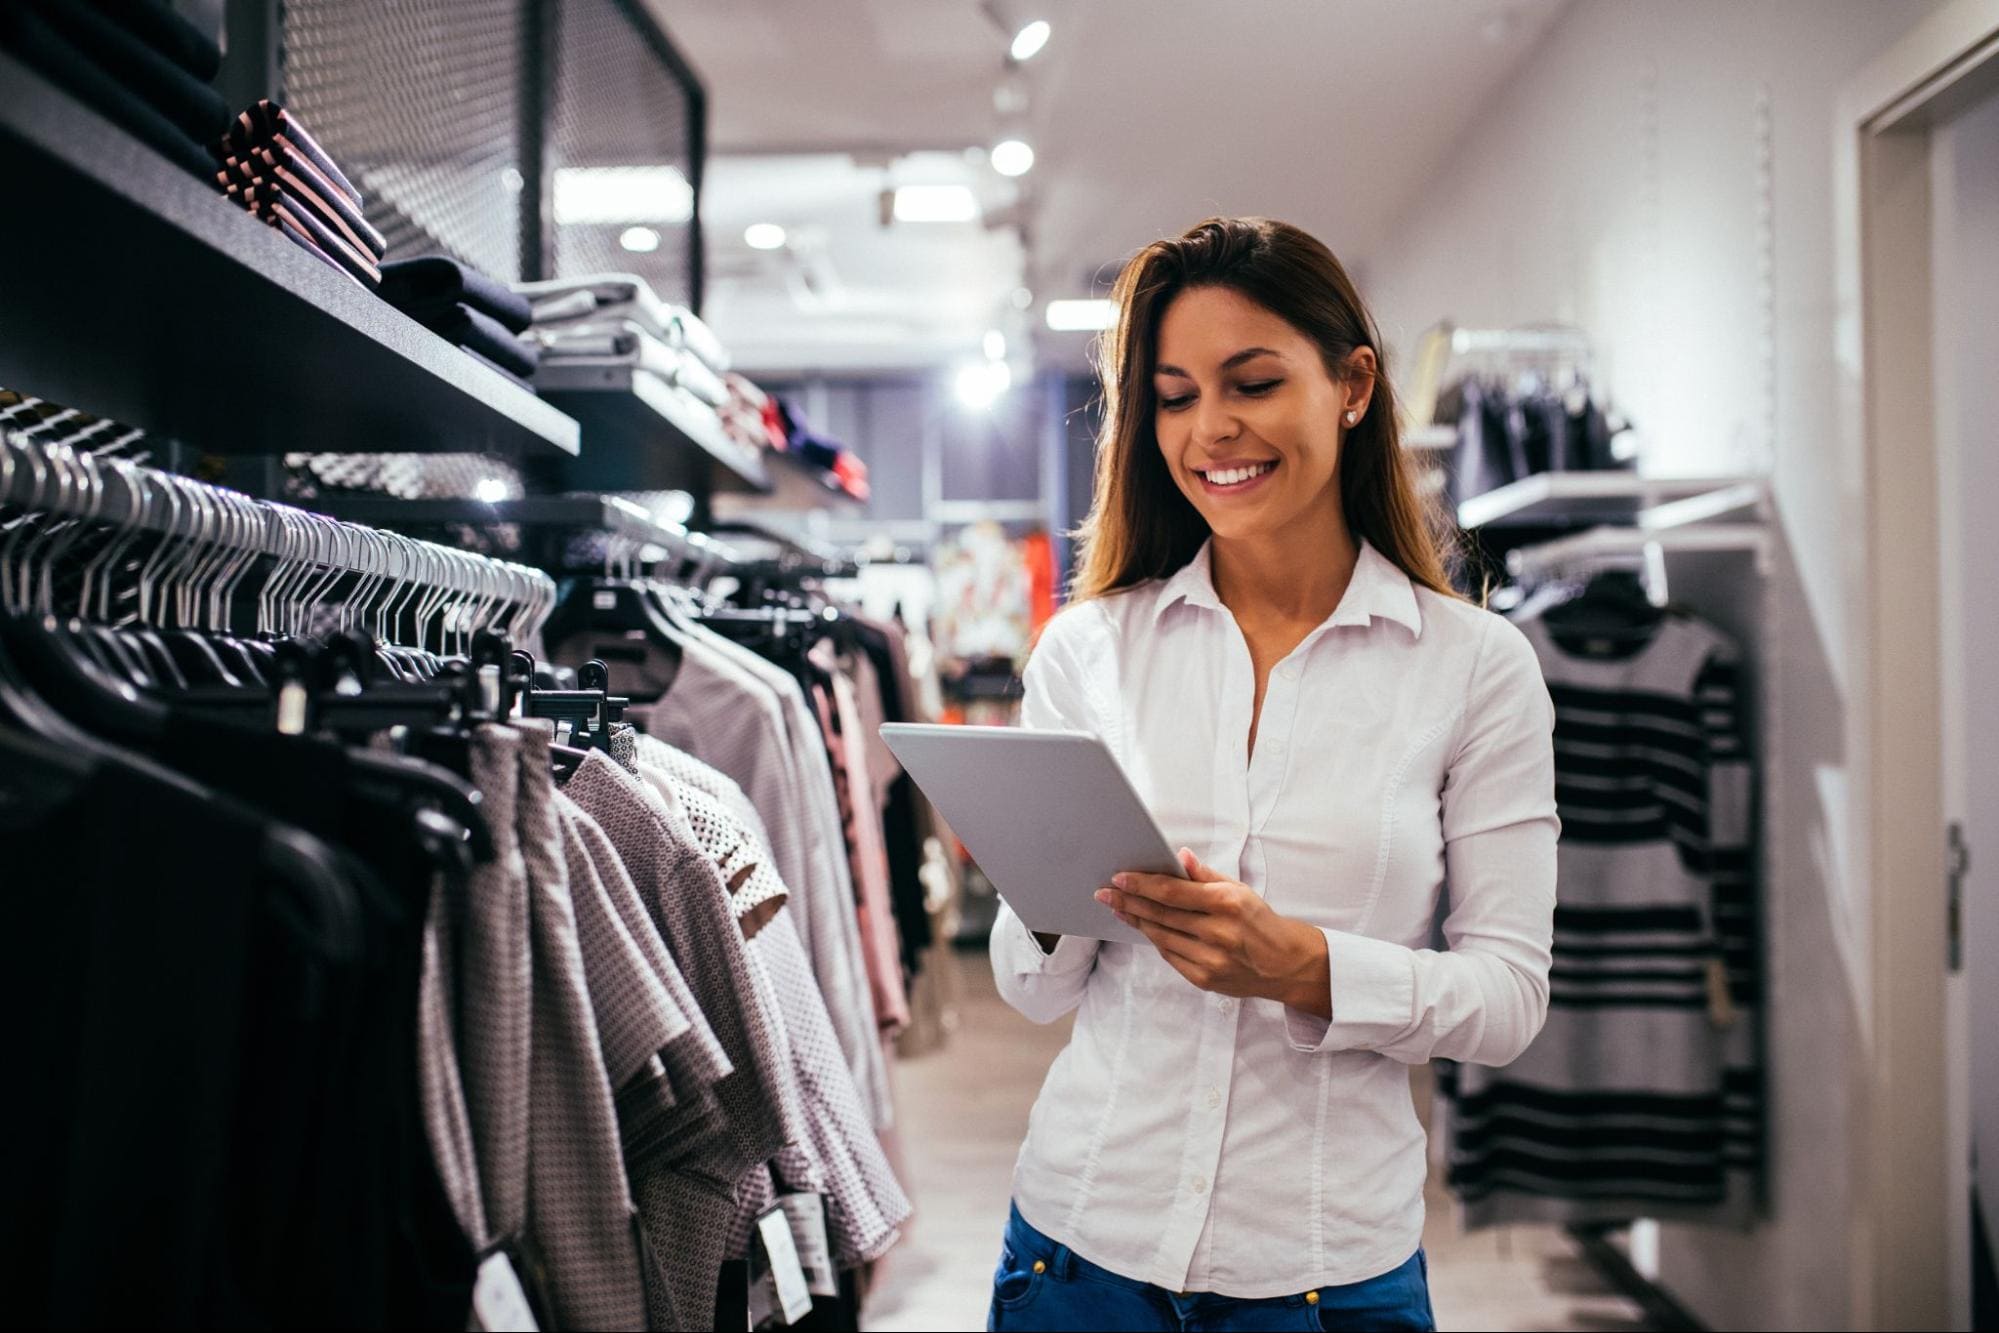 A list of questions to assist you successfully apply for the role of store manager